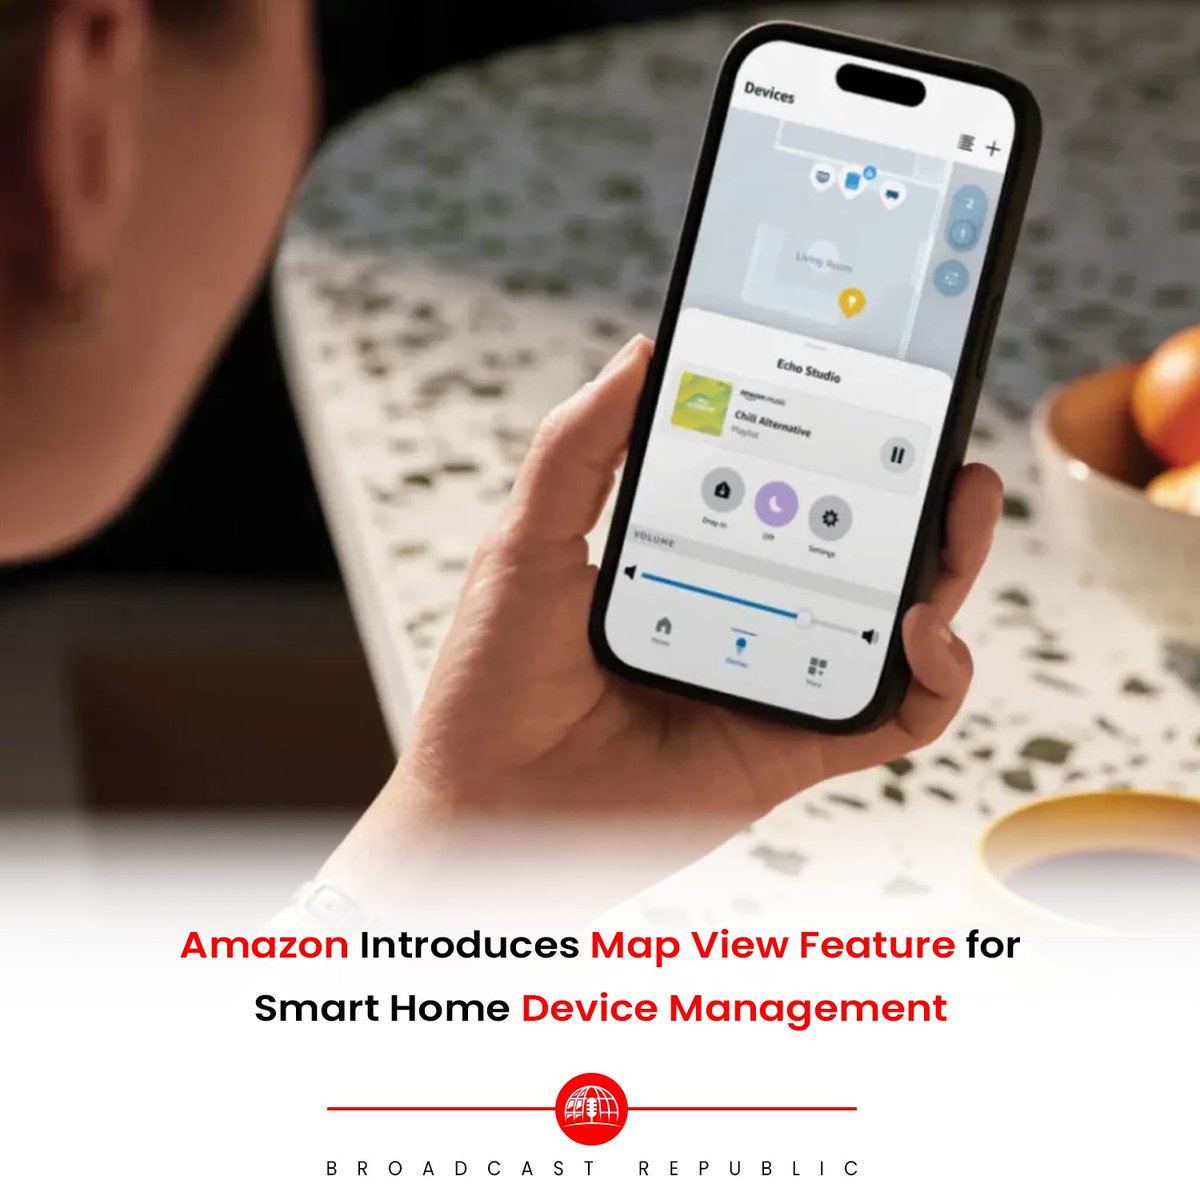 Amazon has unveiled an innovative feature called 'Map View' during a press event at its HQ2 headquarters in Arlington, Virginia. 

#BroadcastRepublic #Amazon #MapView #SmartHomeDevices #AlexaApp #DigitalMapping